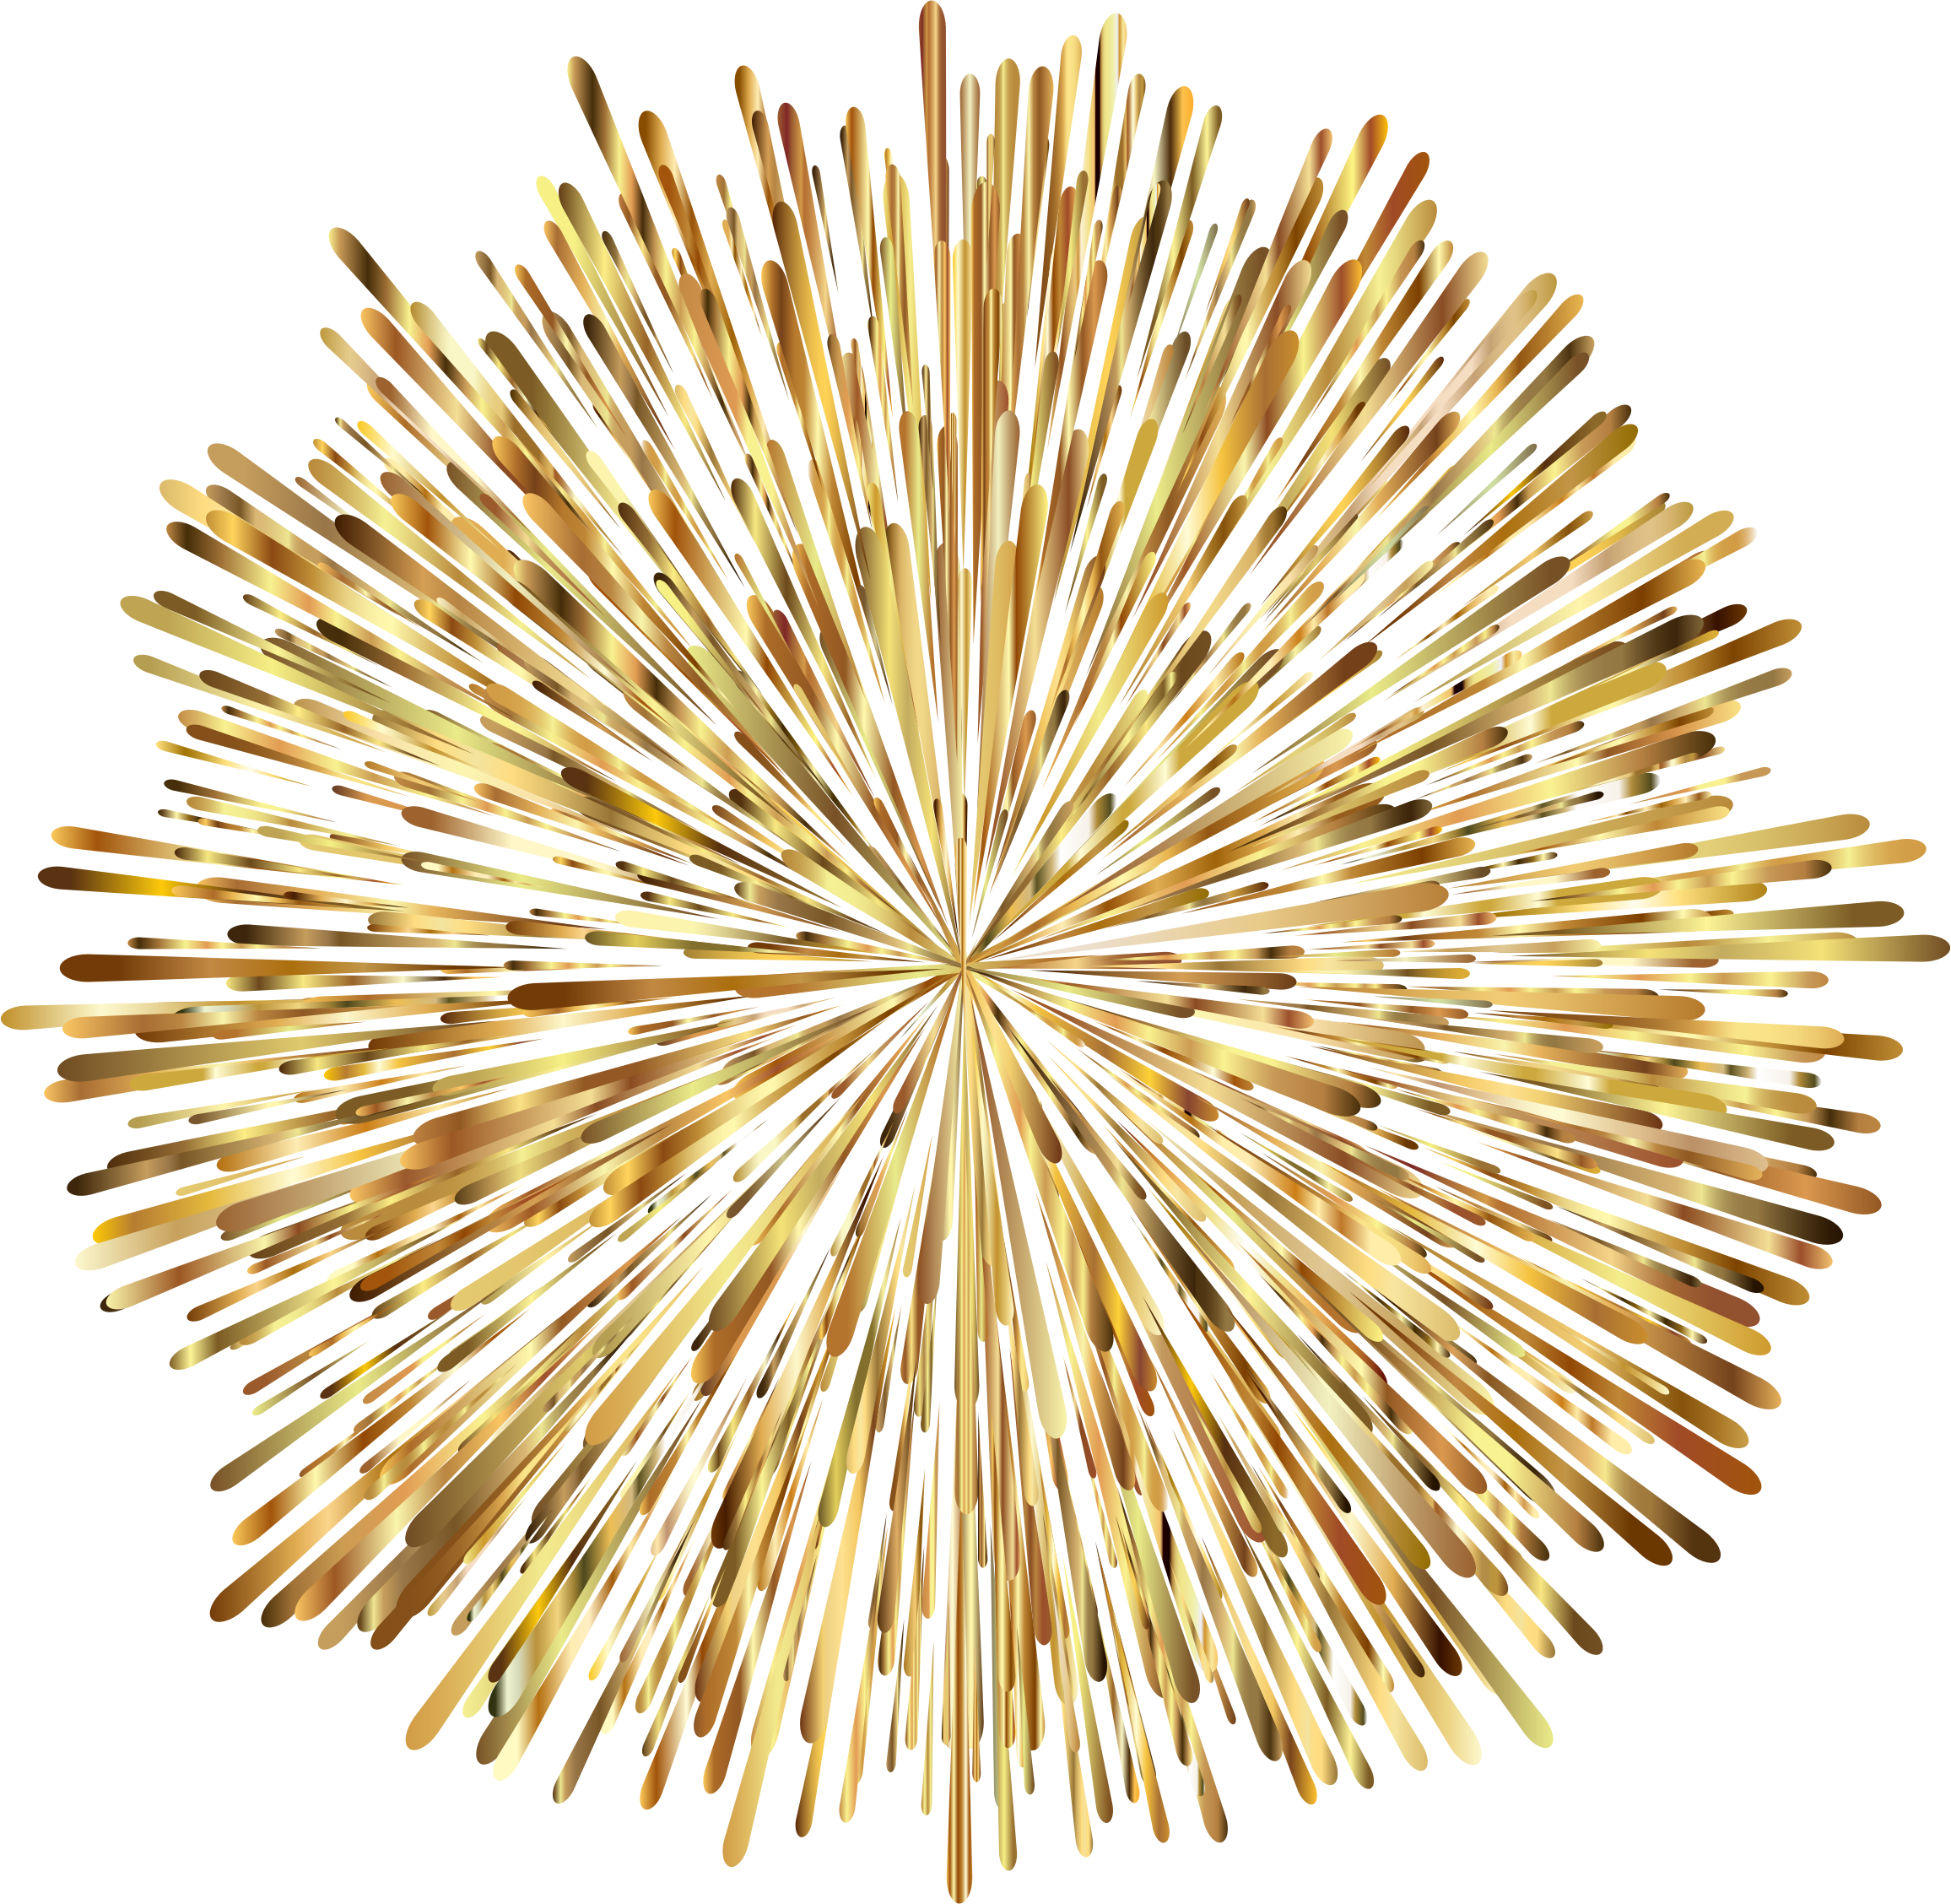 Golden Fireworks Vector Photos PNG Image High Quality PNG Image